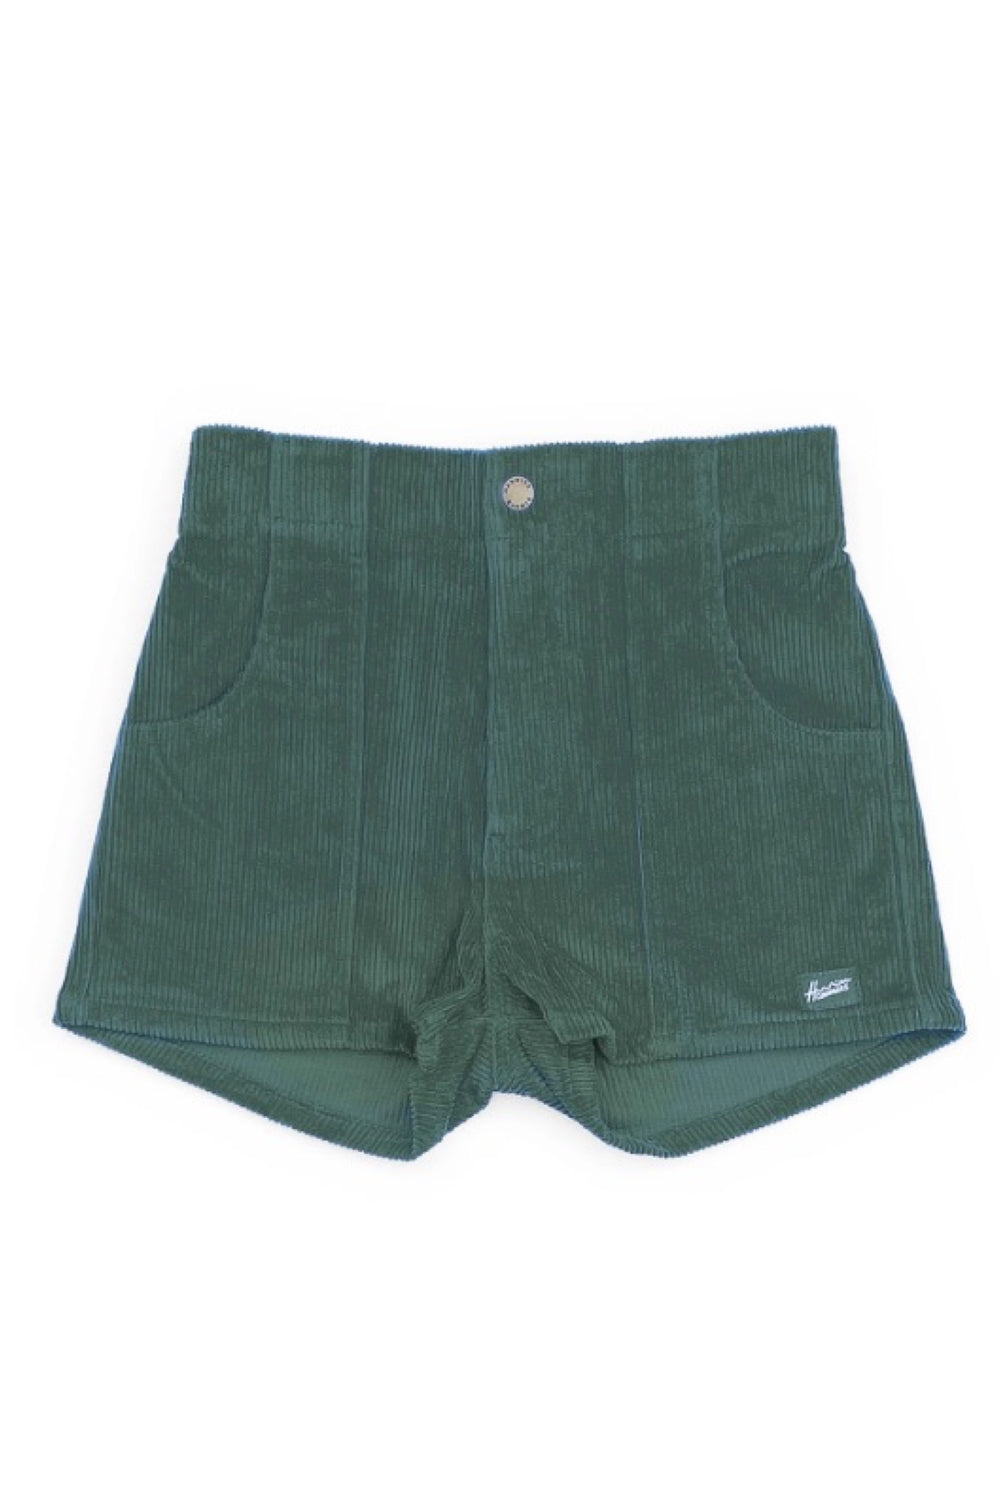 Forest Green Hammies Shorts